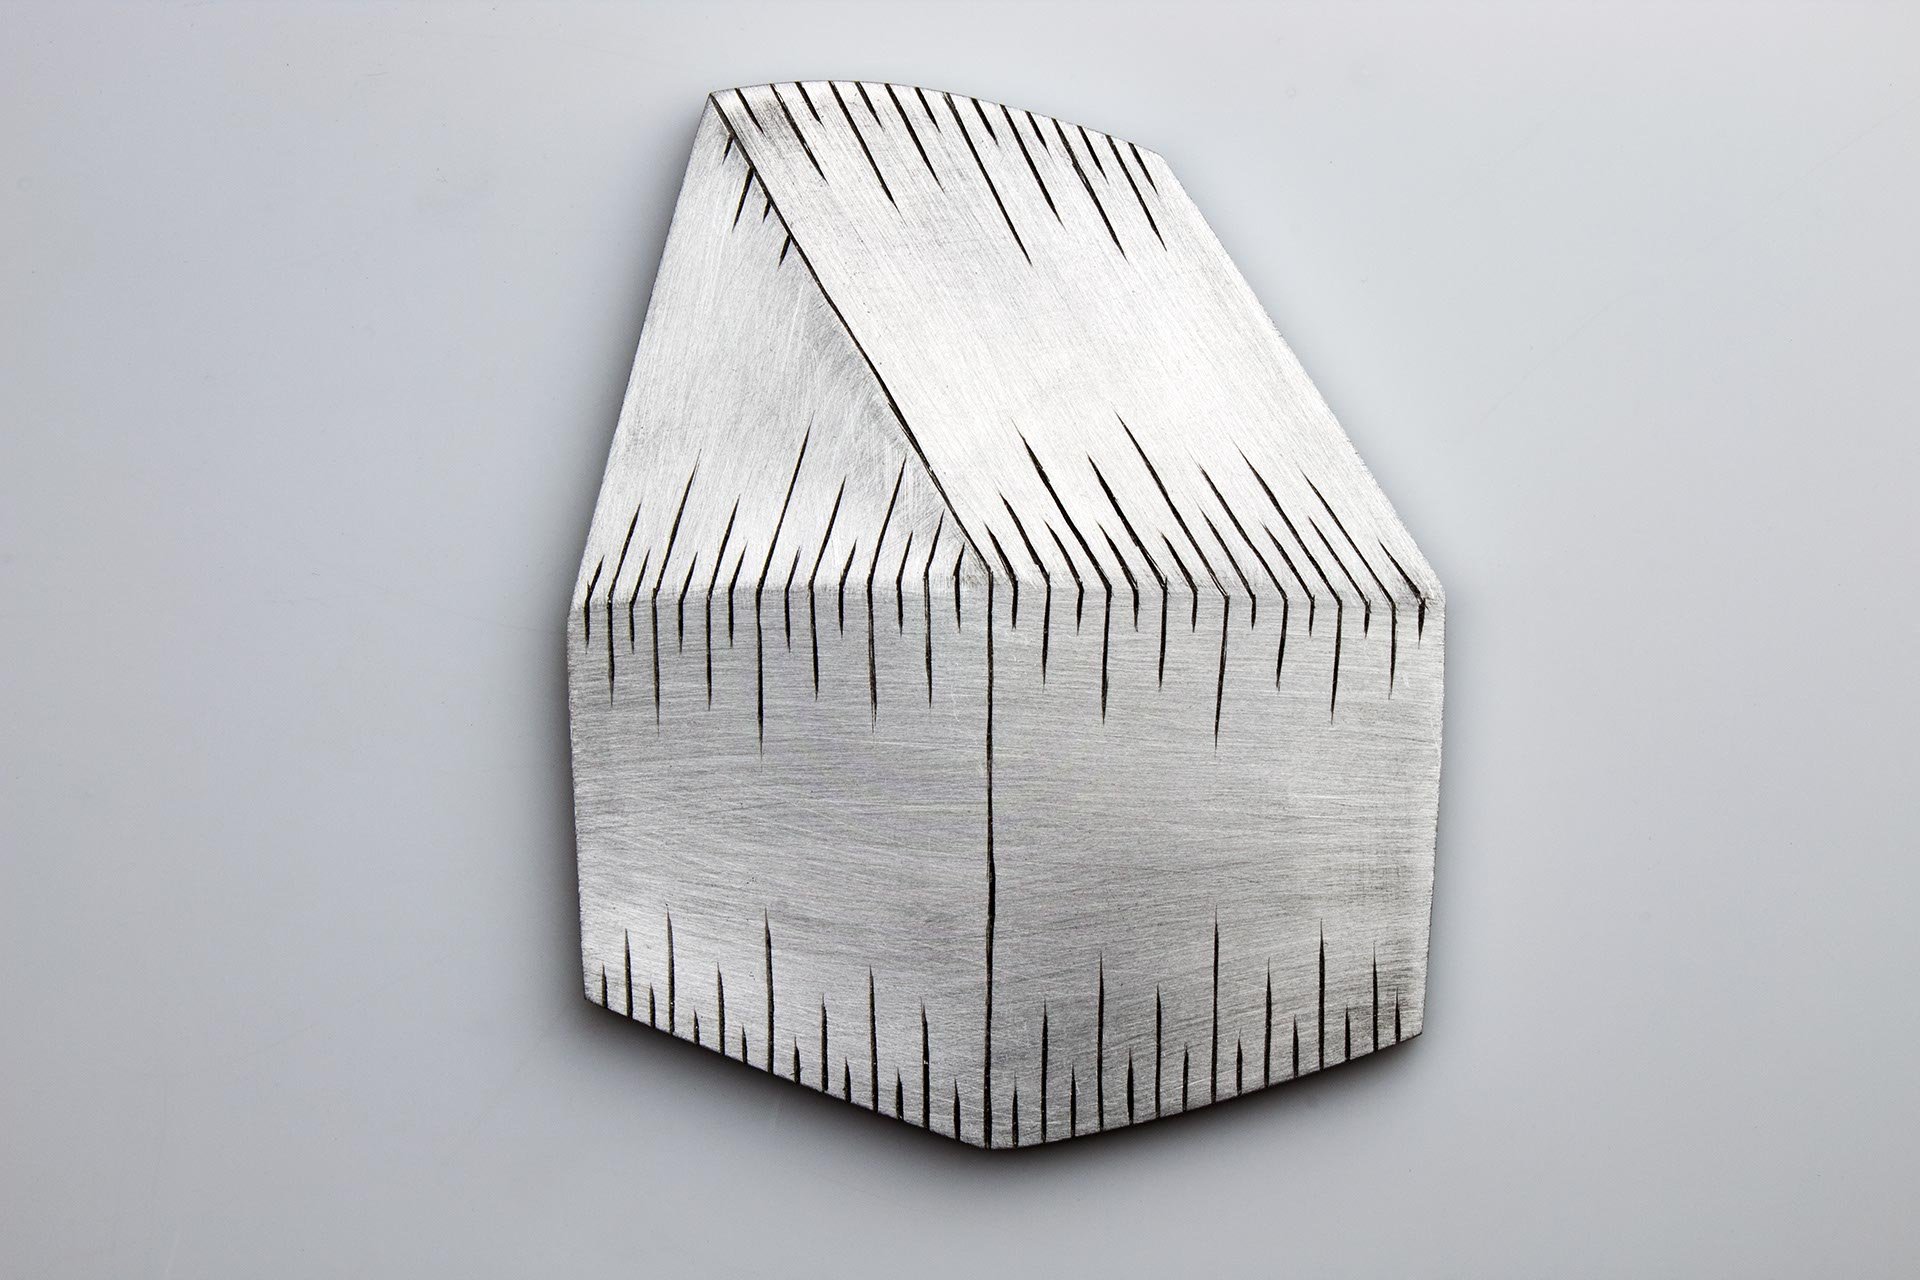 Instrument #26, 3.375" x 4" x .25",  hand engraved aluminum and ink.